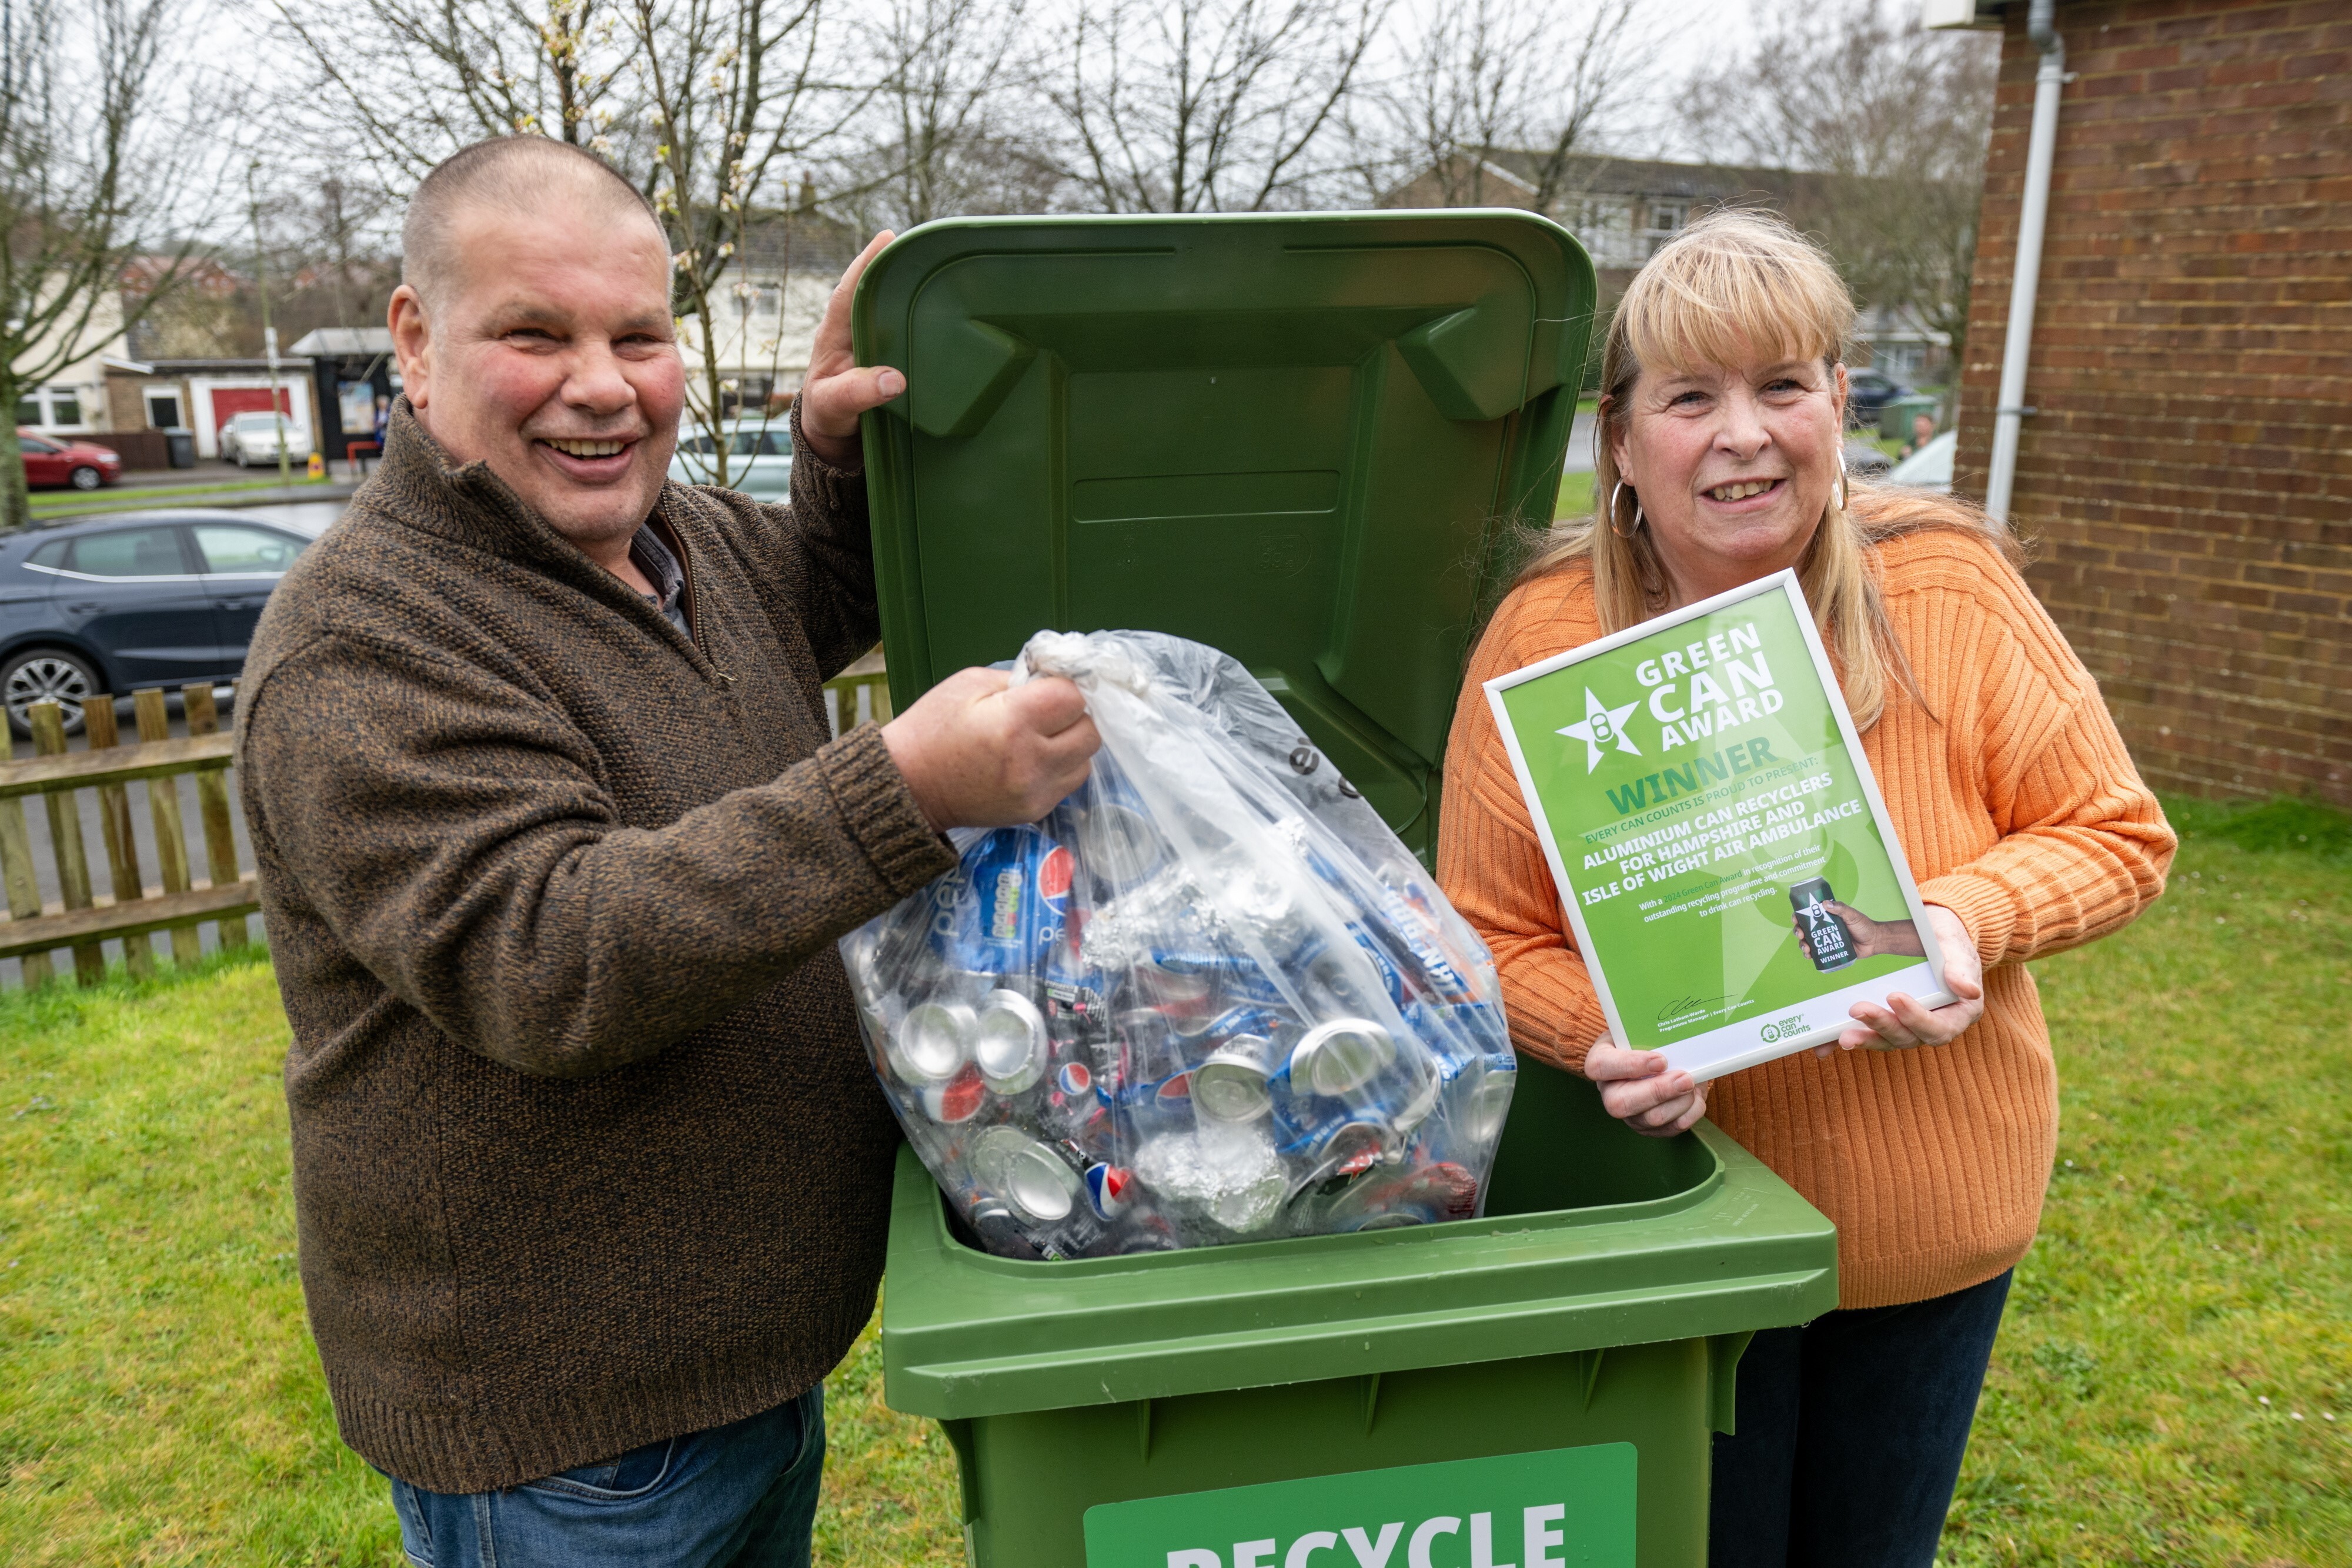 Recycle for Kicks Count NI triumphs with Green Can Award presented by Every Can Counts